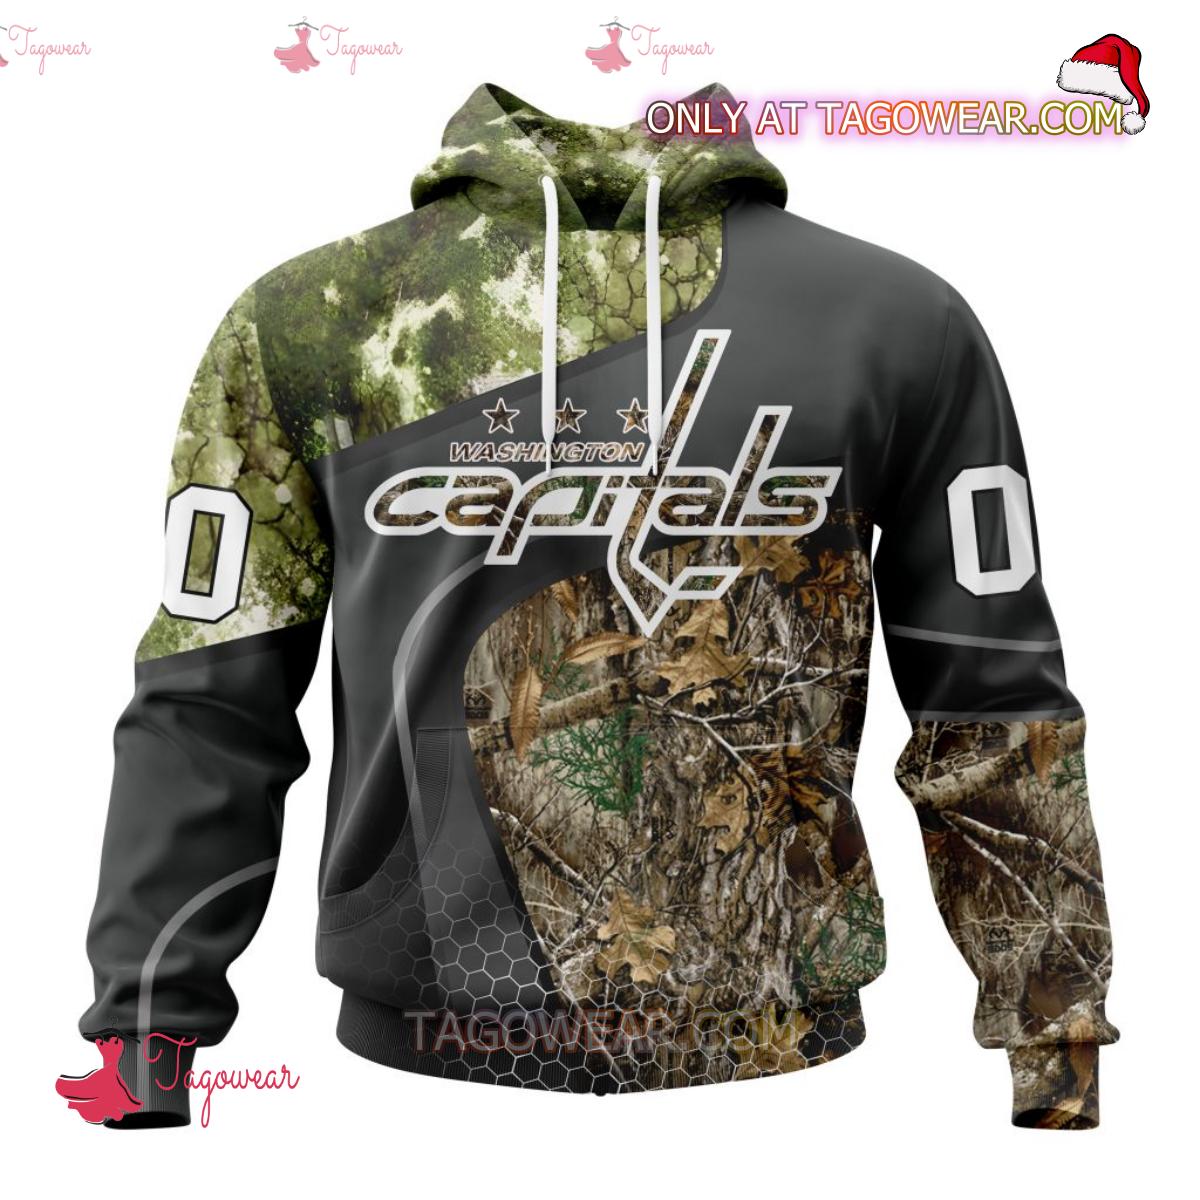 Washington Capitals NHL Team Hunting Camouflage Personalized T-shirt, Hoodie